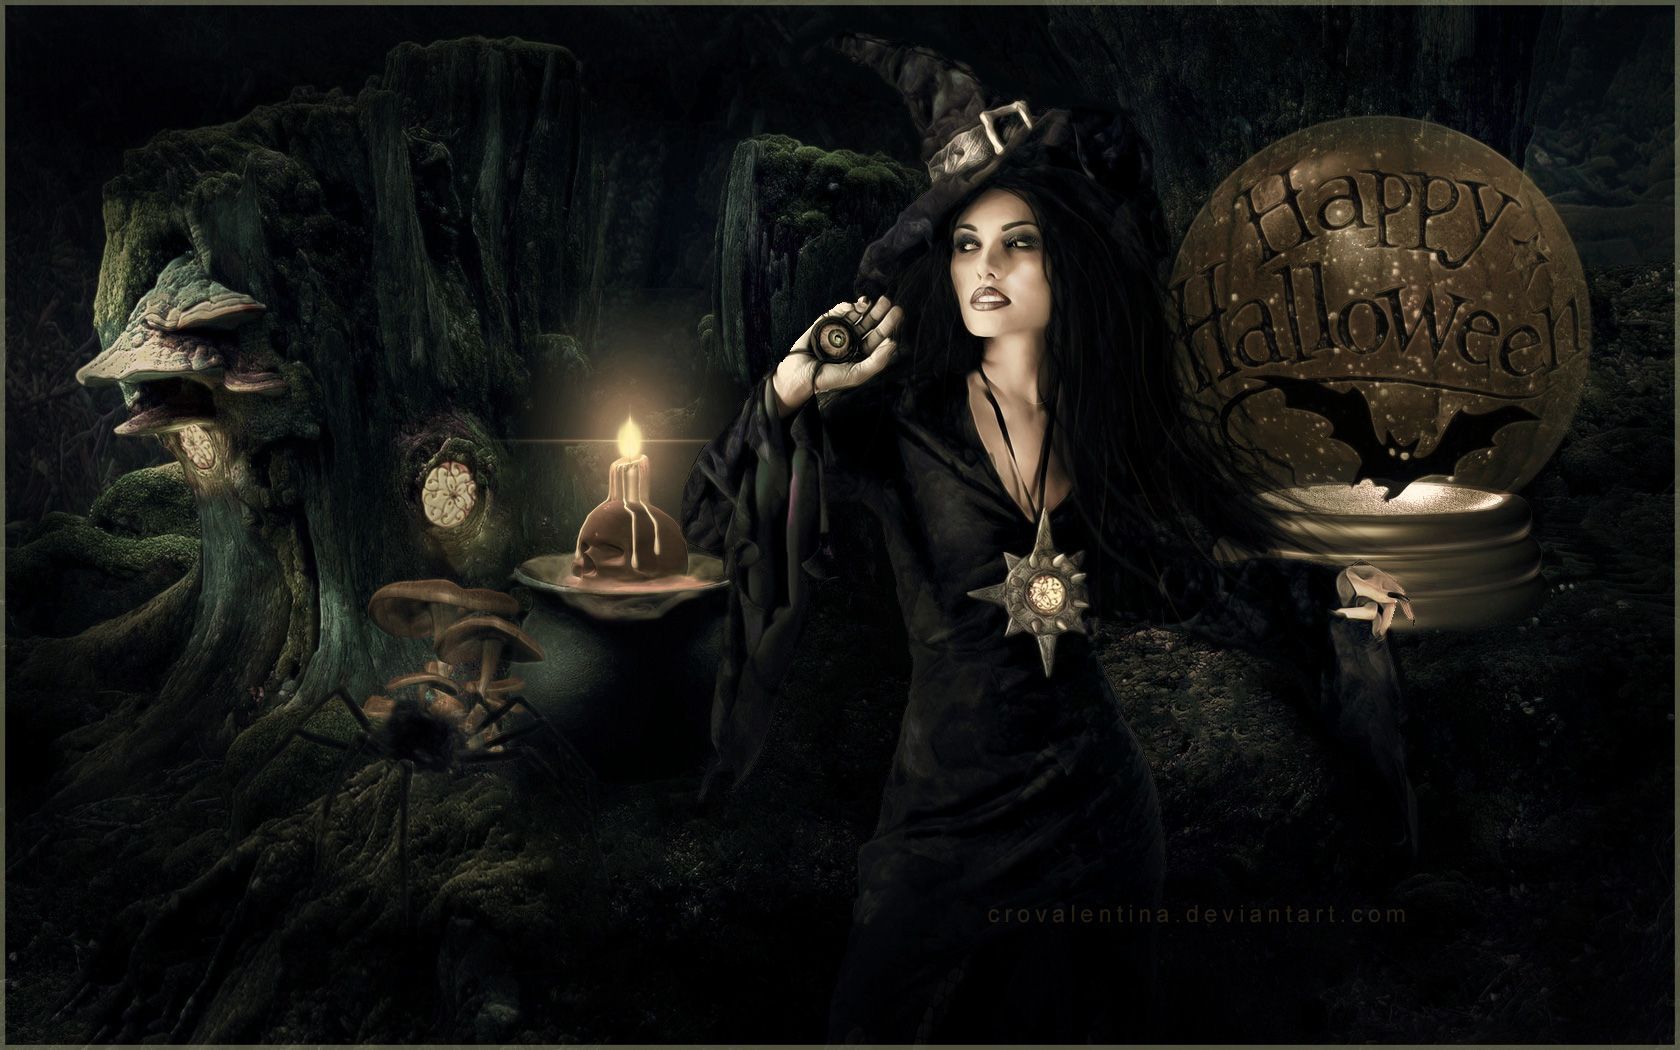 Free Wiccan Wallpaper. Witch wallpaper, Halloween wallpaper, Halloween desktop wallpaper